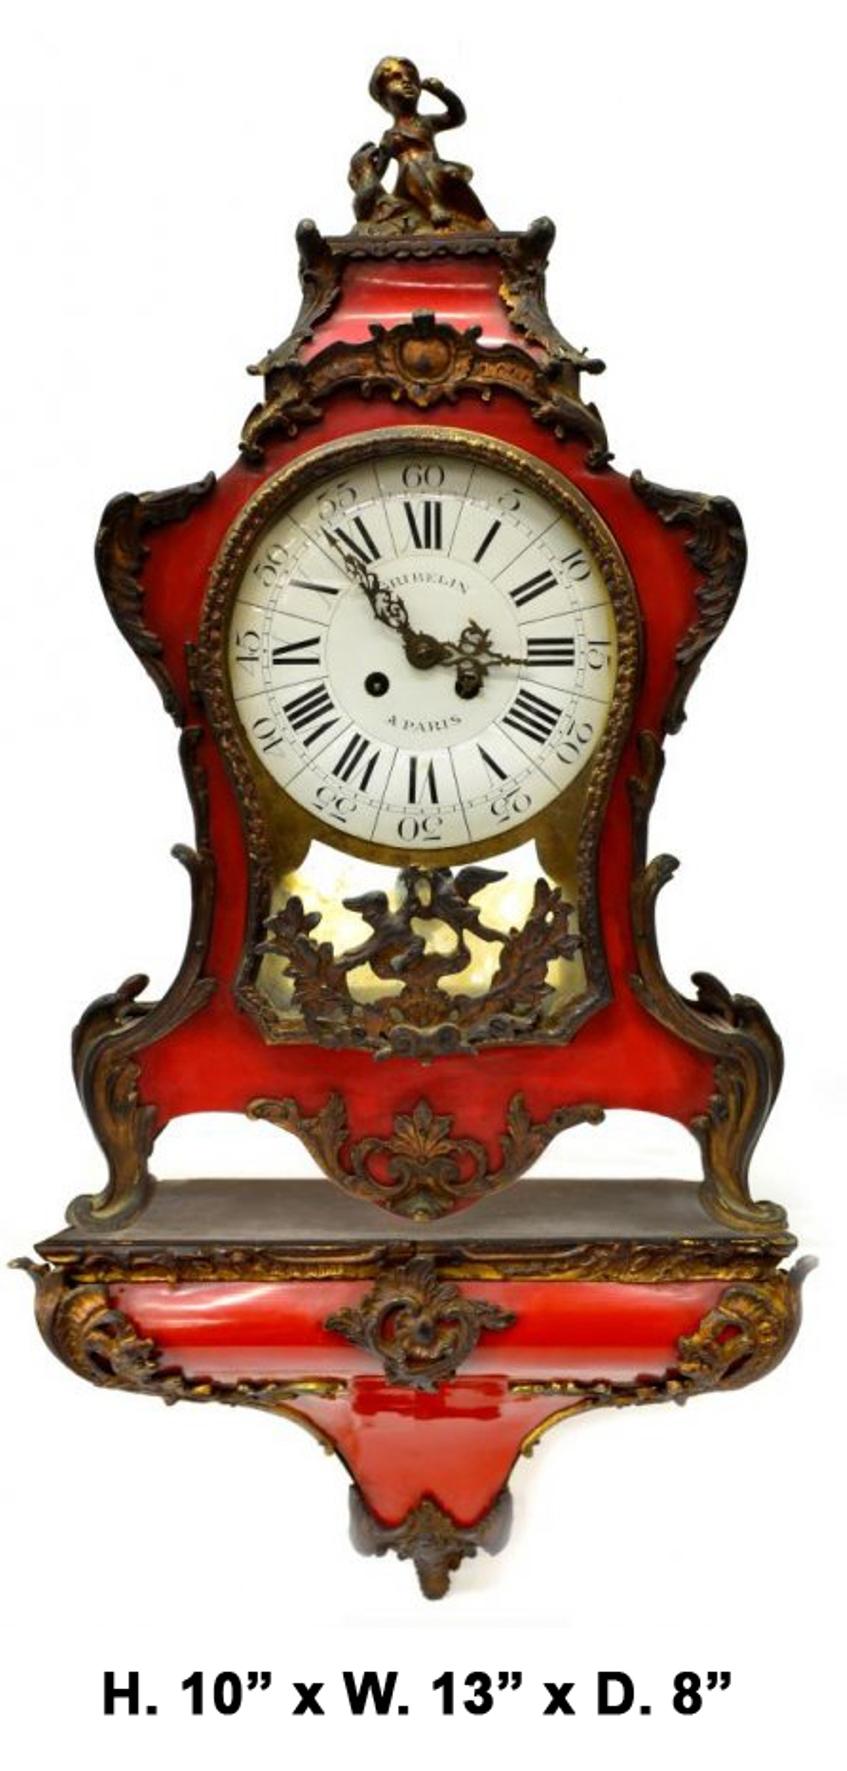 French 19c Louis XV style red mantle and wall clock on wall bracket signed GRIBELIN a Paris
The clock is surmounted with a gilt bronze seated girl dressed in traditional clothing above a enamel round face presenting with Roman numerals, above a